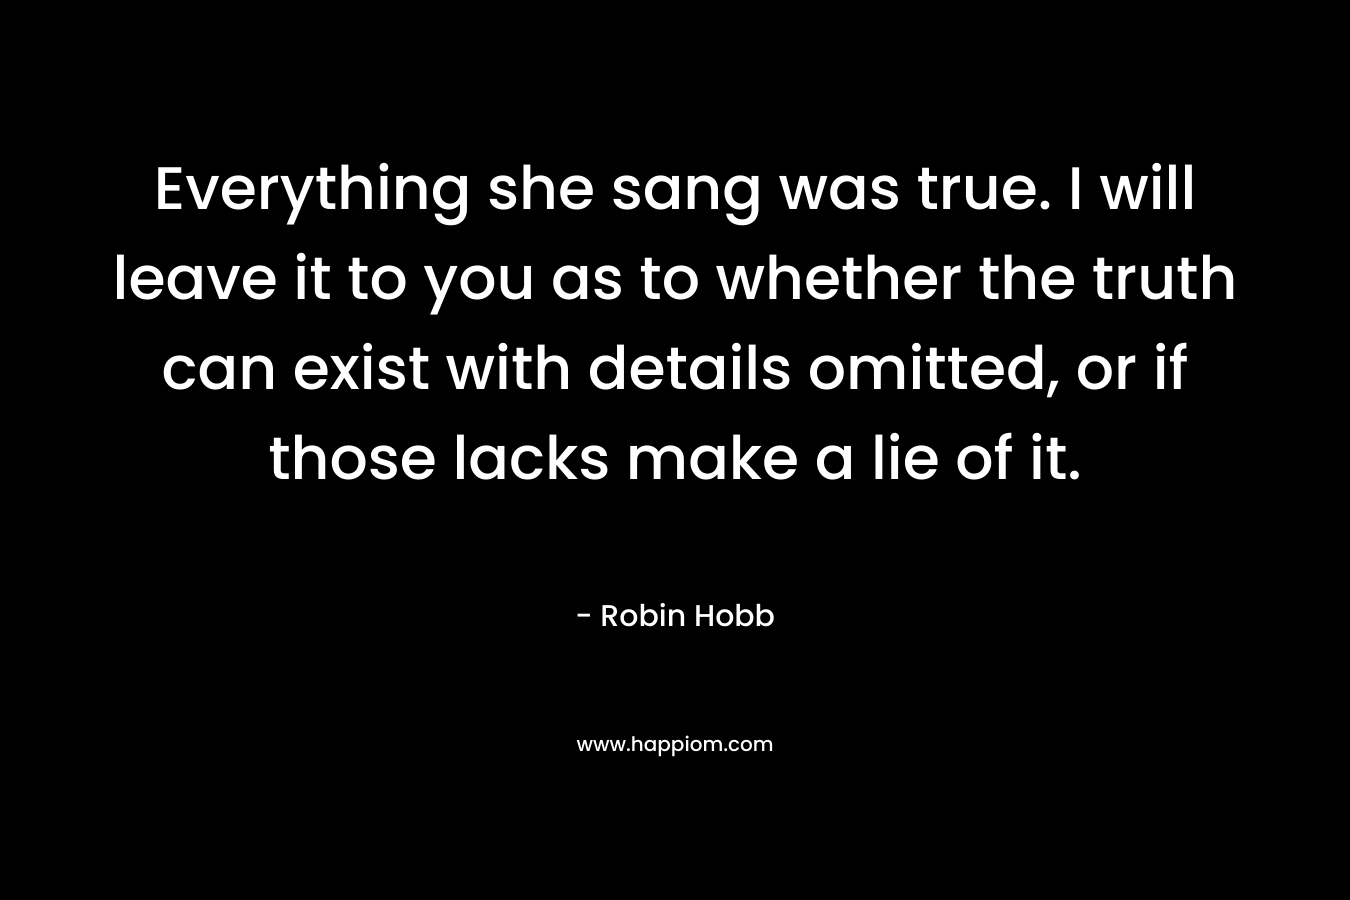 Everything she sang was true. I will leave it to you as to whether the truth can exist with details omitted, or if those lacks make a lie of it. – Robin Hobb